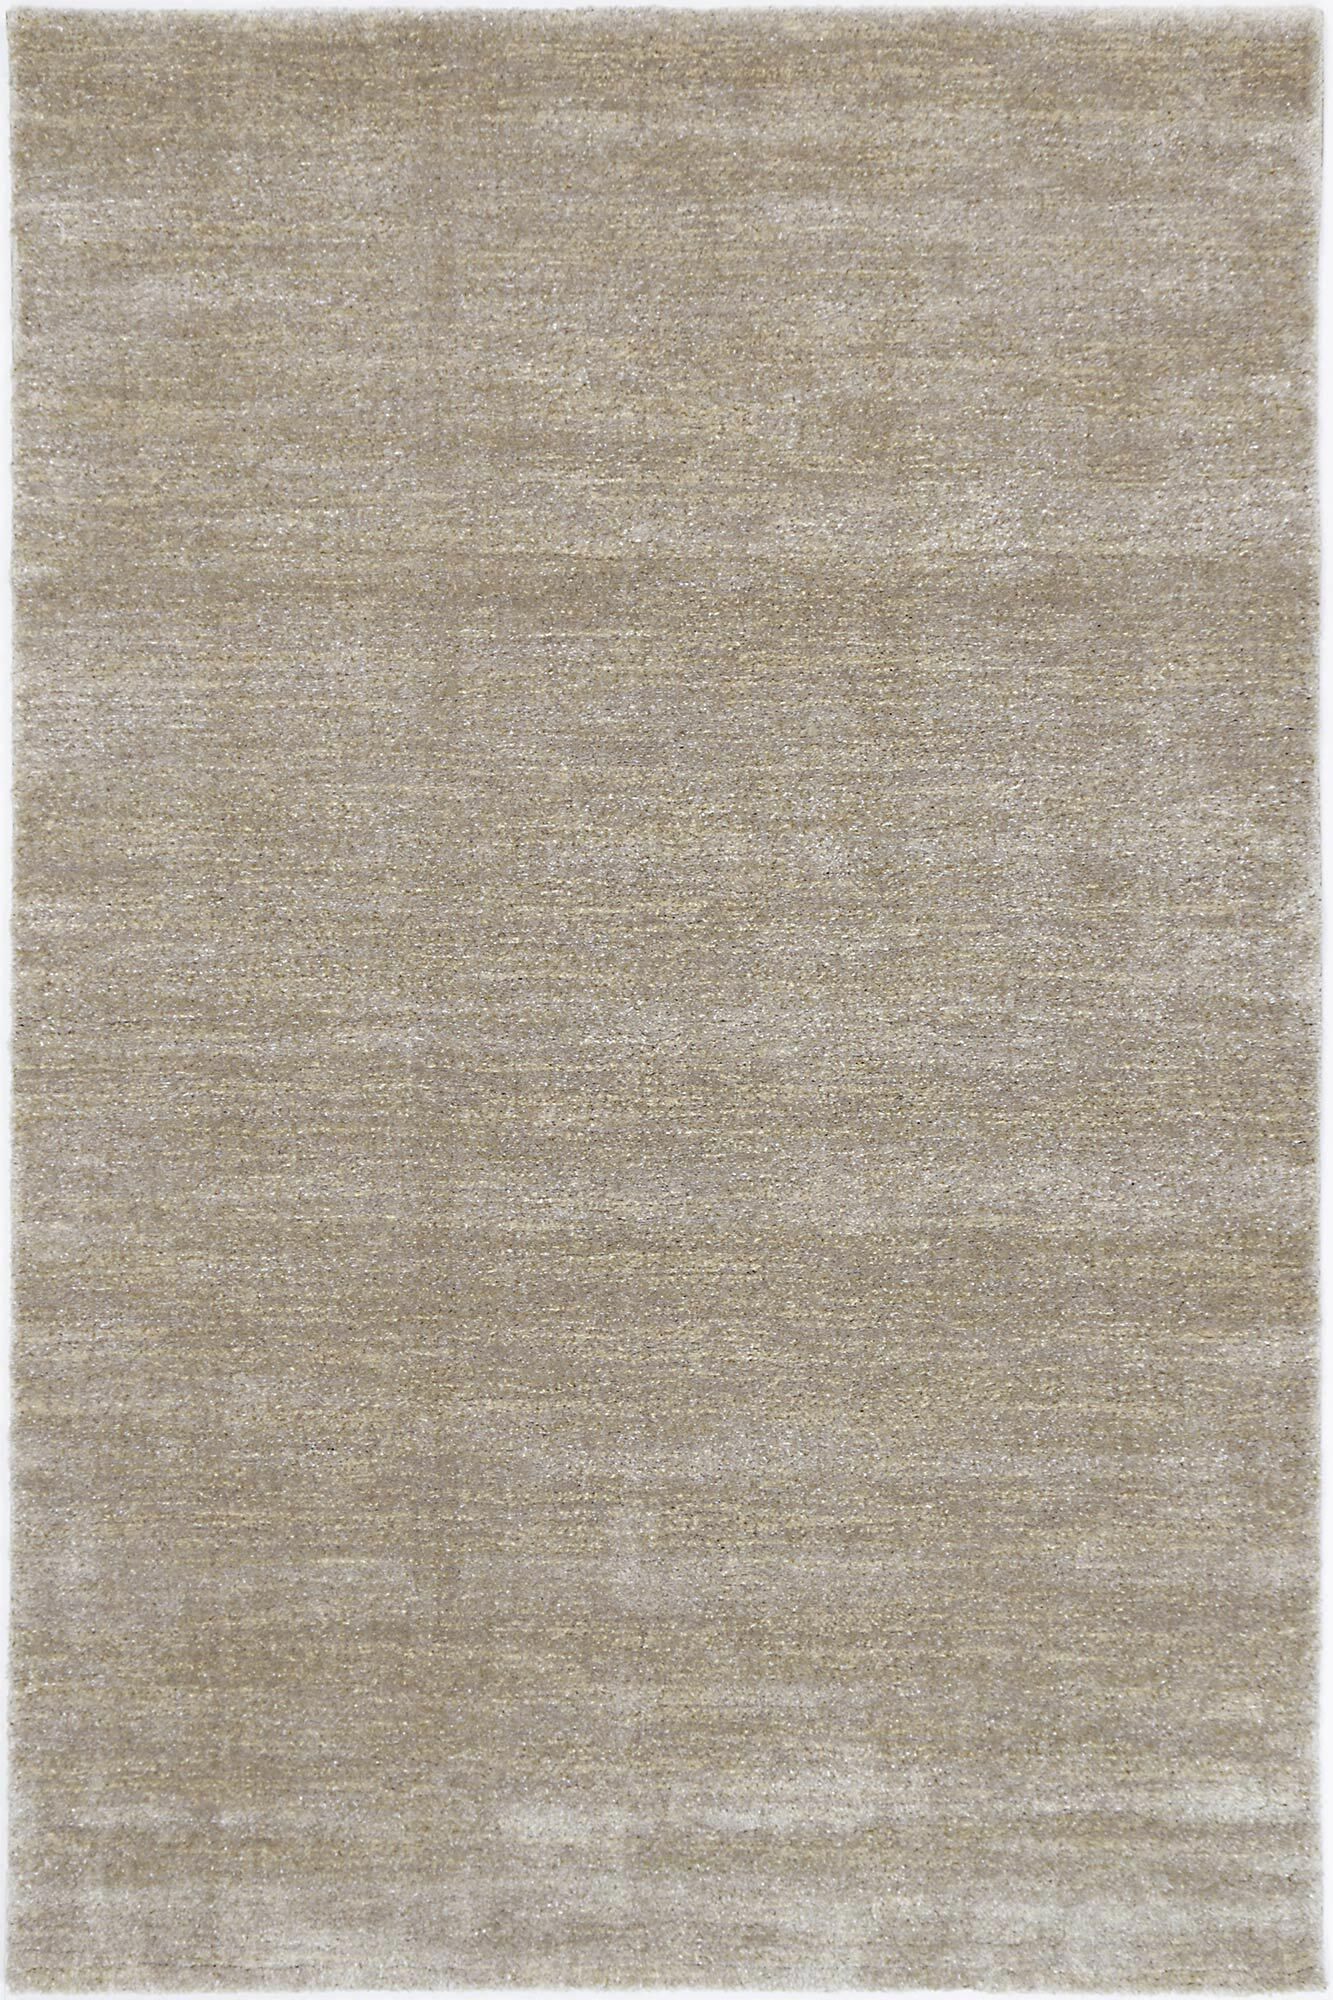 Pave Solid Colour Rug | Beige Rugs | Free Shipping